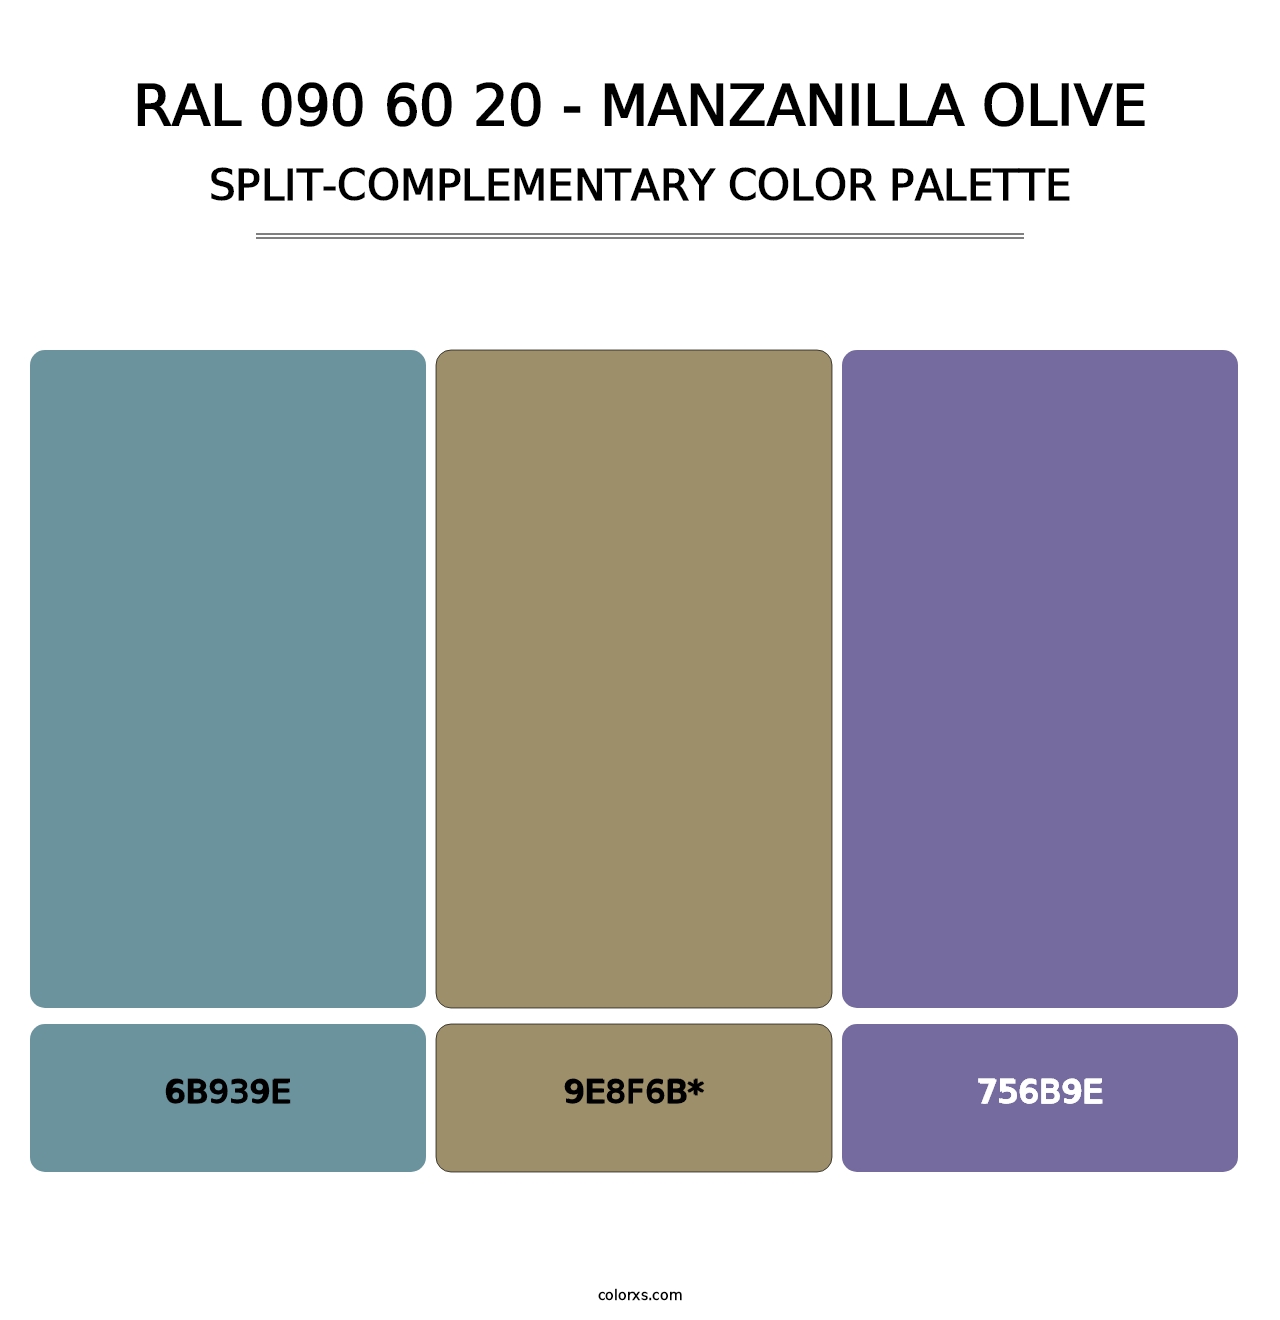 RAL 090 60 20 - Manzanilla Olive - Split-Complementary Color Palette